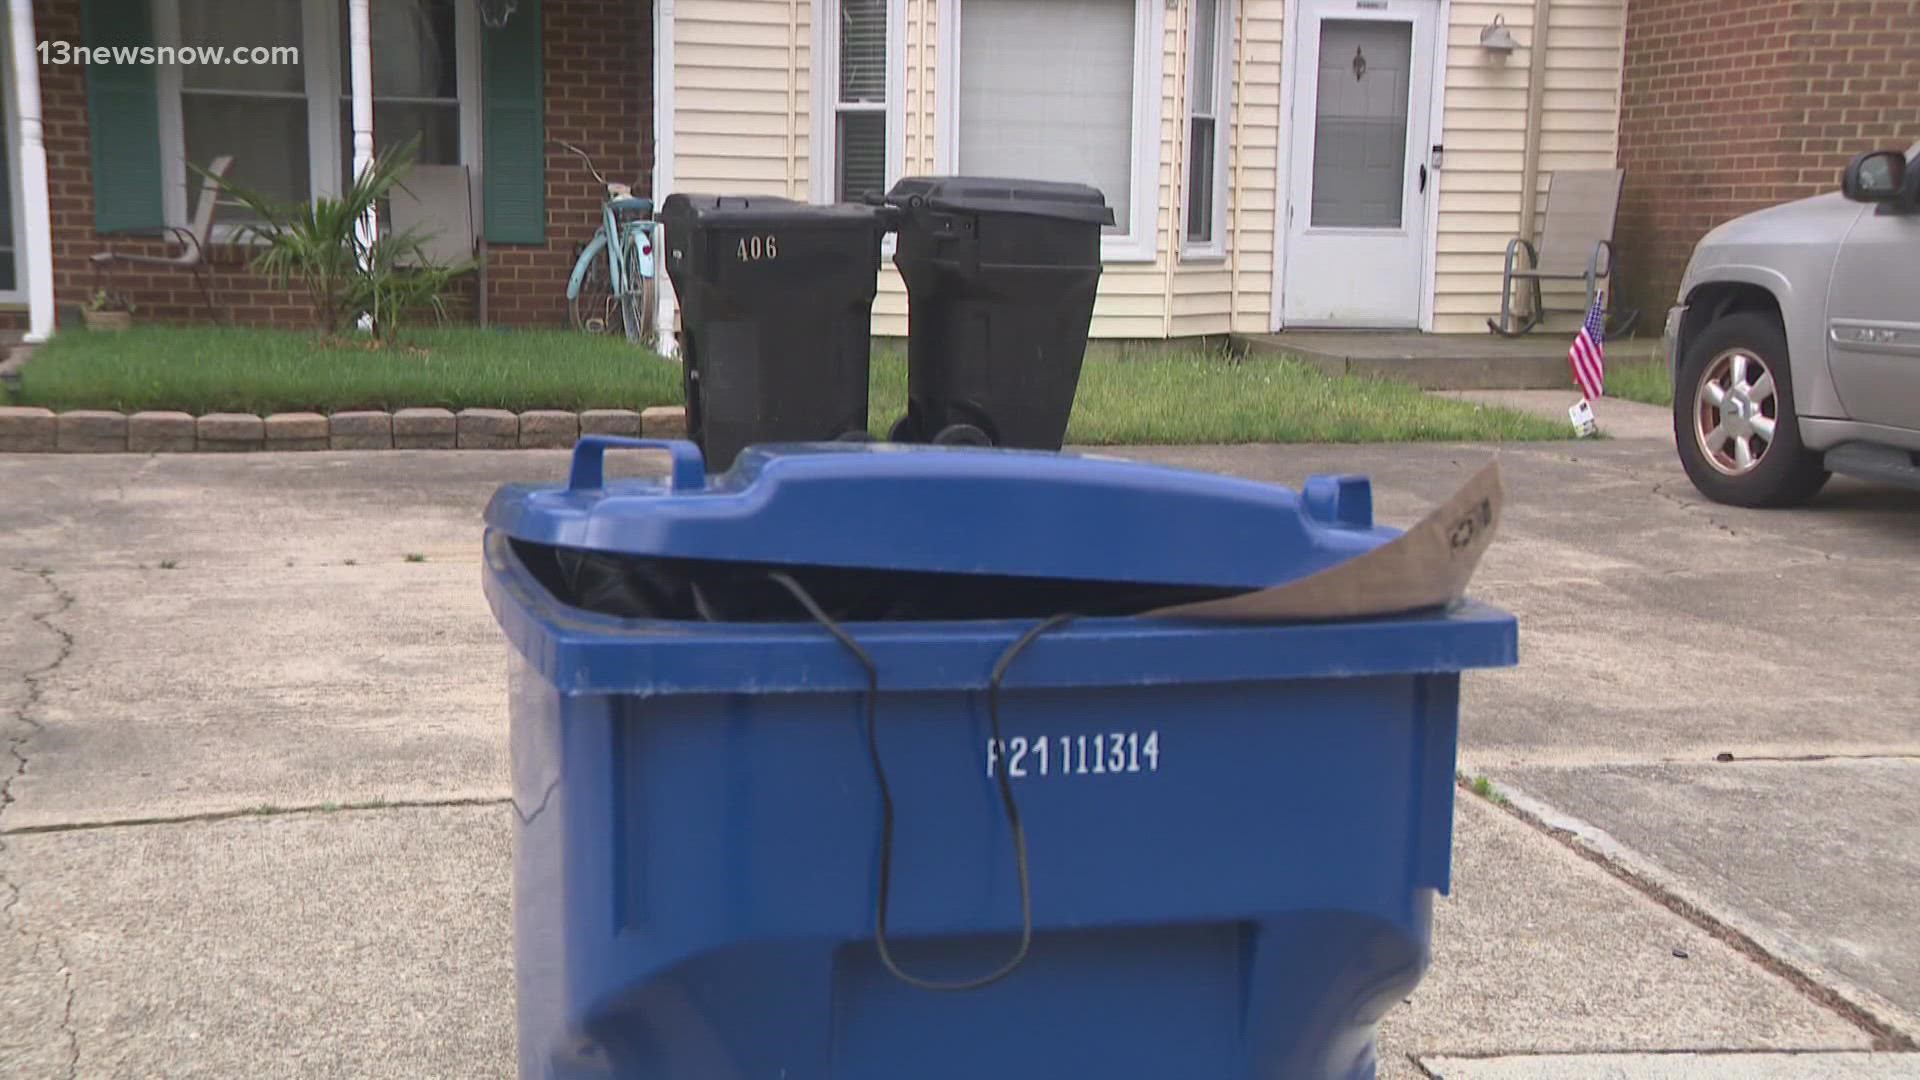 City leaders said TFC Recycling, the company that picks up recycling in Virginia Beach, is experiencing a driver shortage.